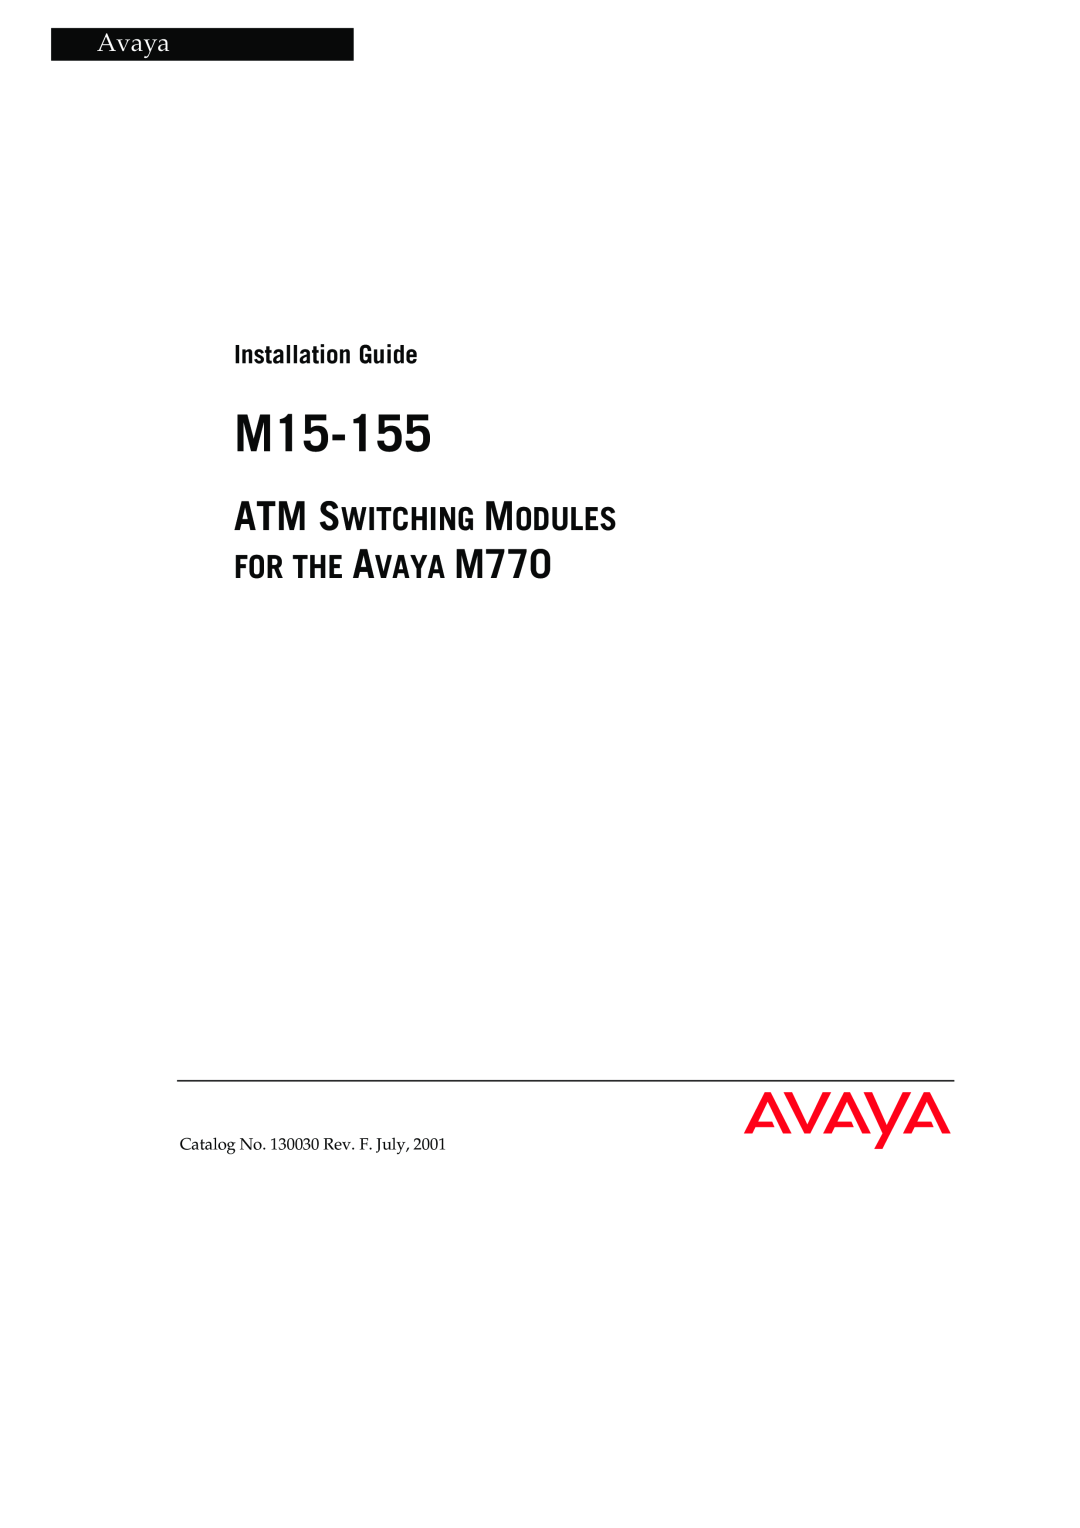 Canon M15-155 manual Avaya, ATM SWITCHING MODULES FOR THE AVAYA M770, Installation Guide 